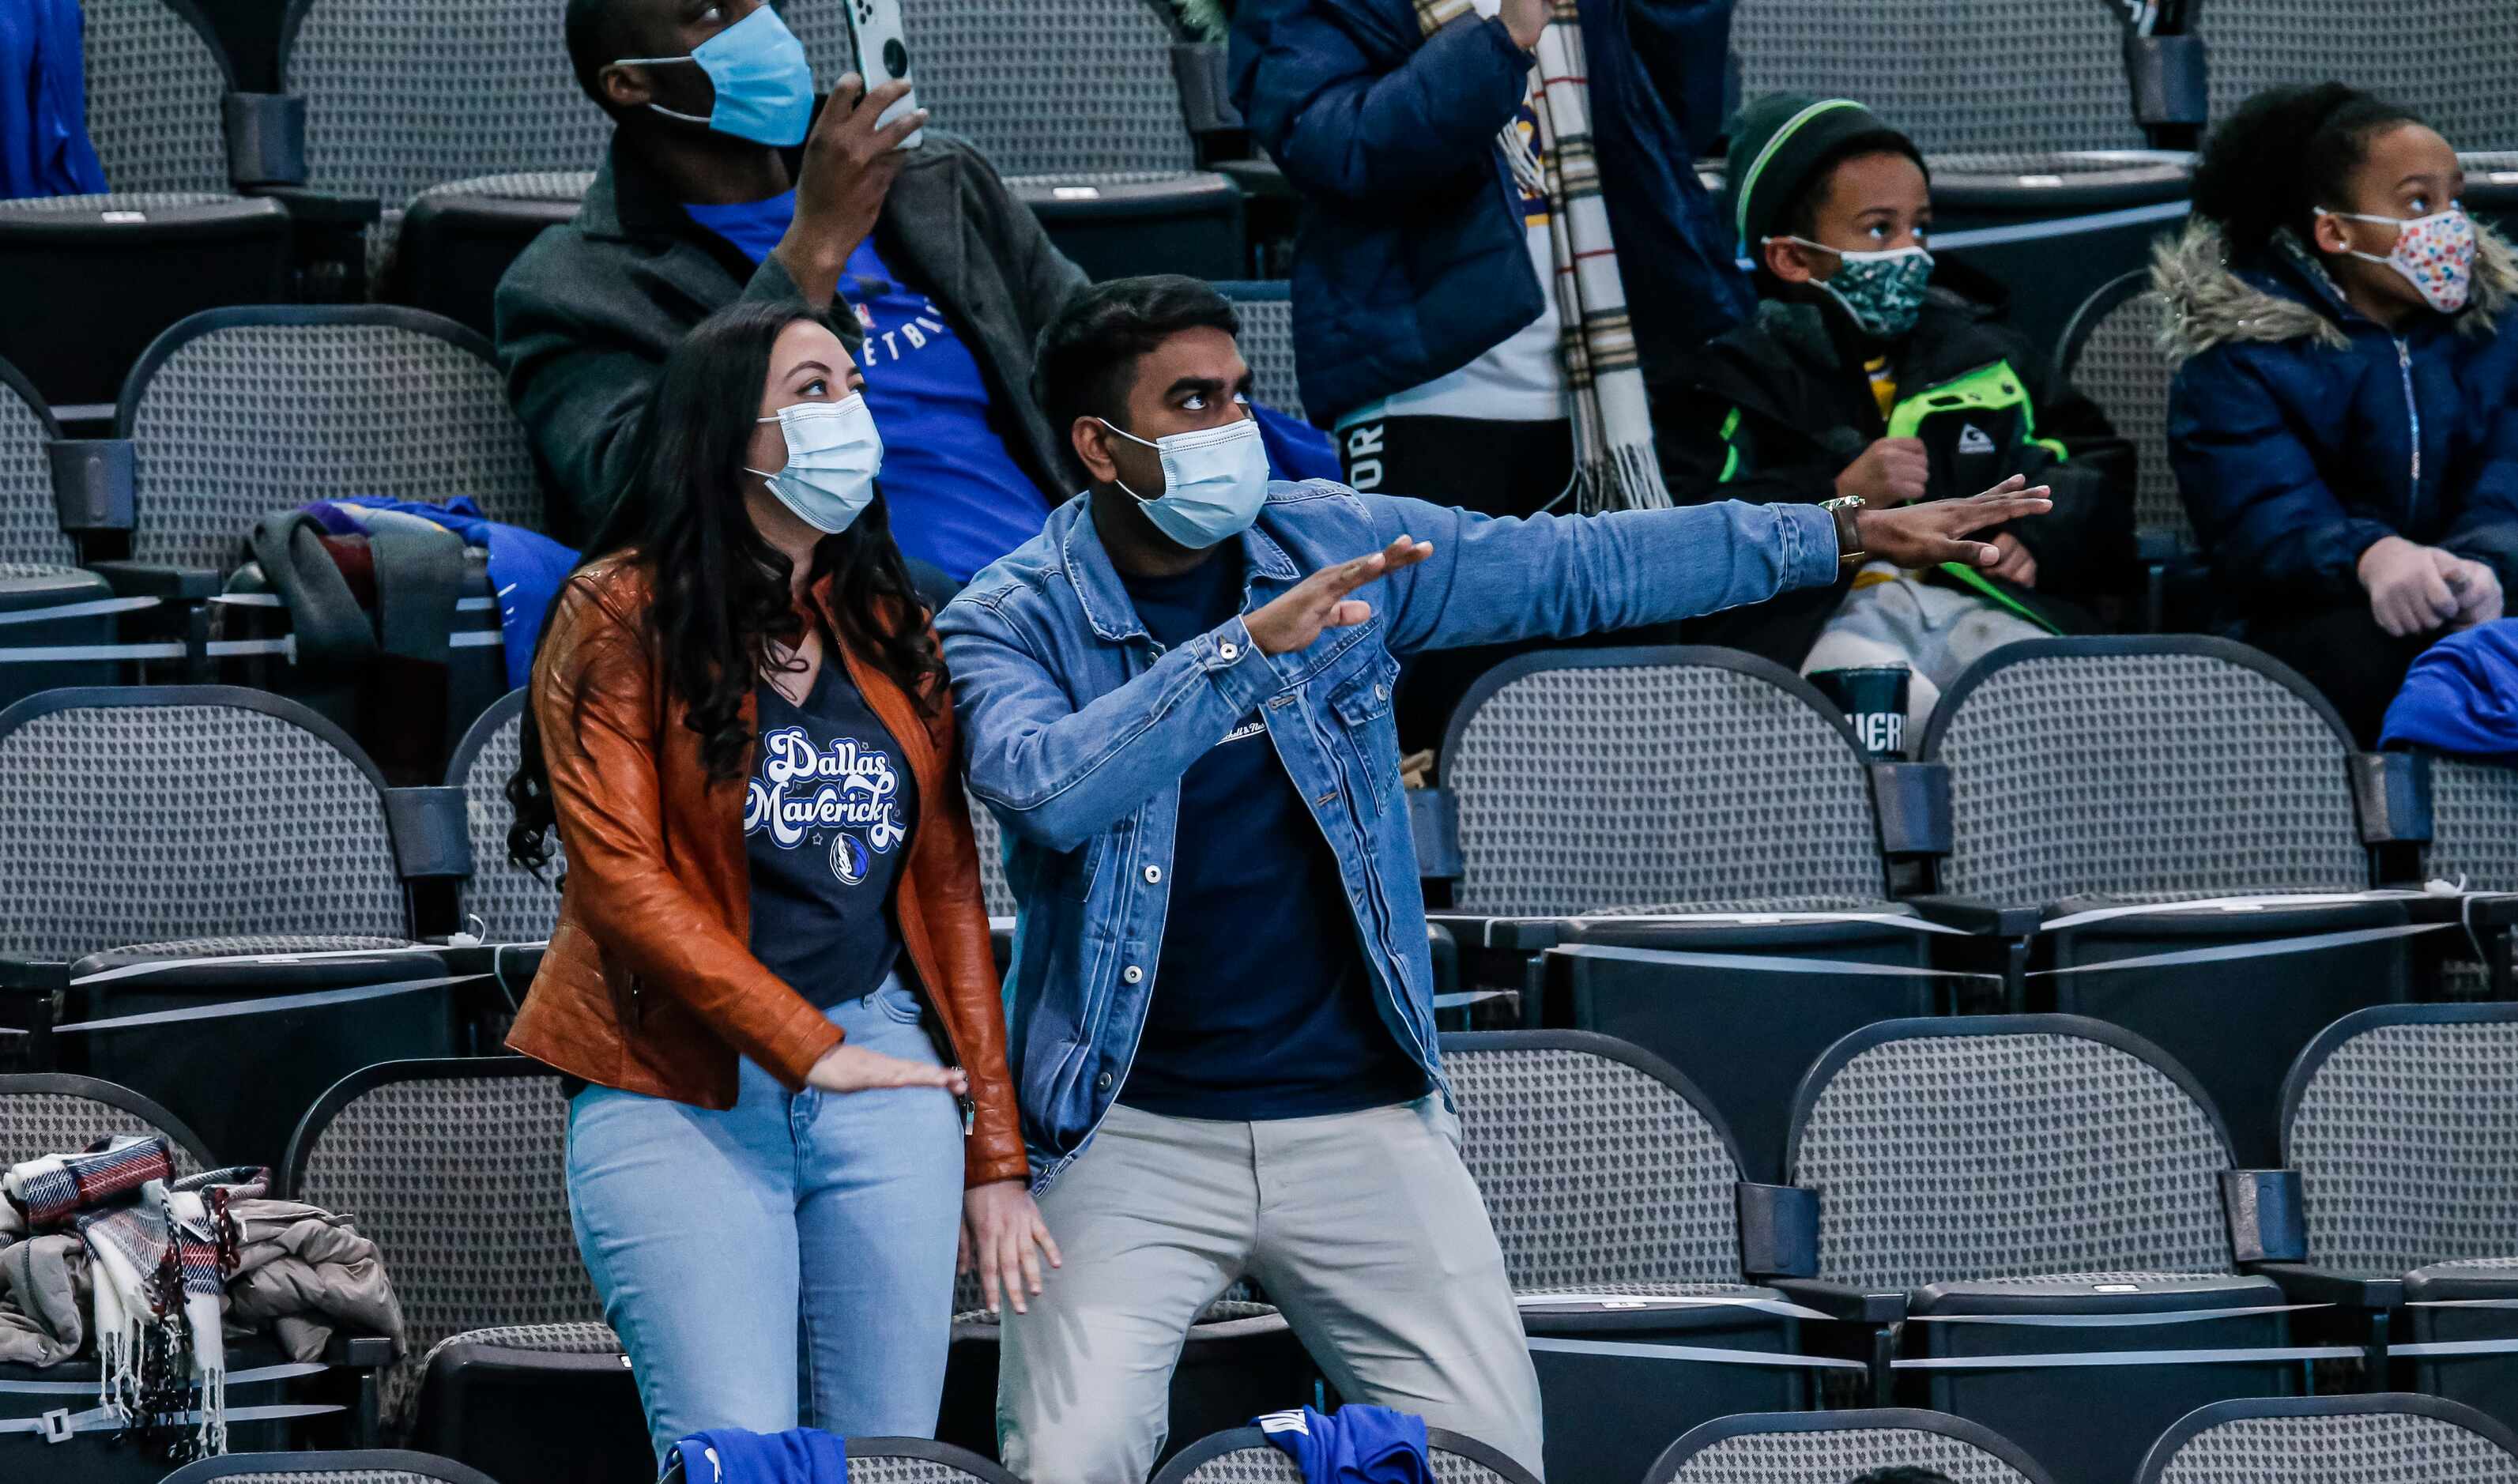 Fans, consisting mostly of healthcare workers, dance for the fancam during an NBA basketball...